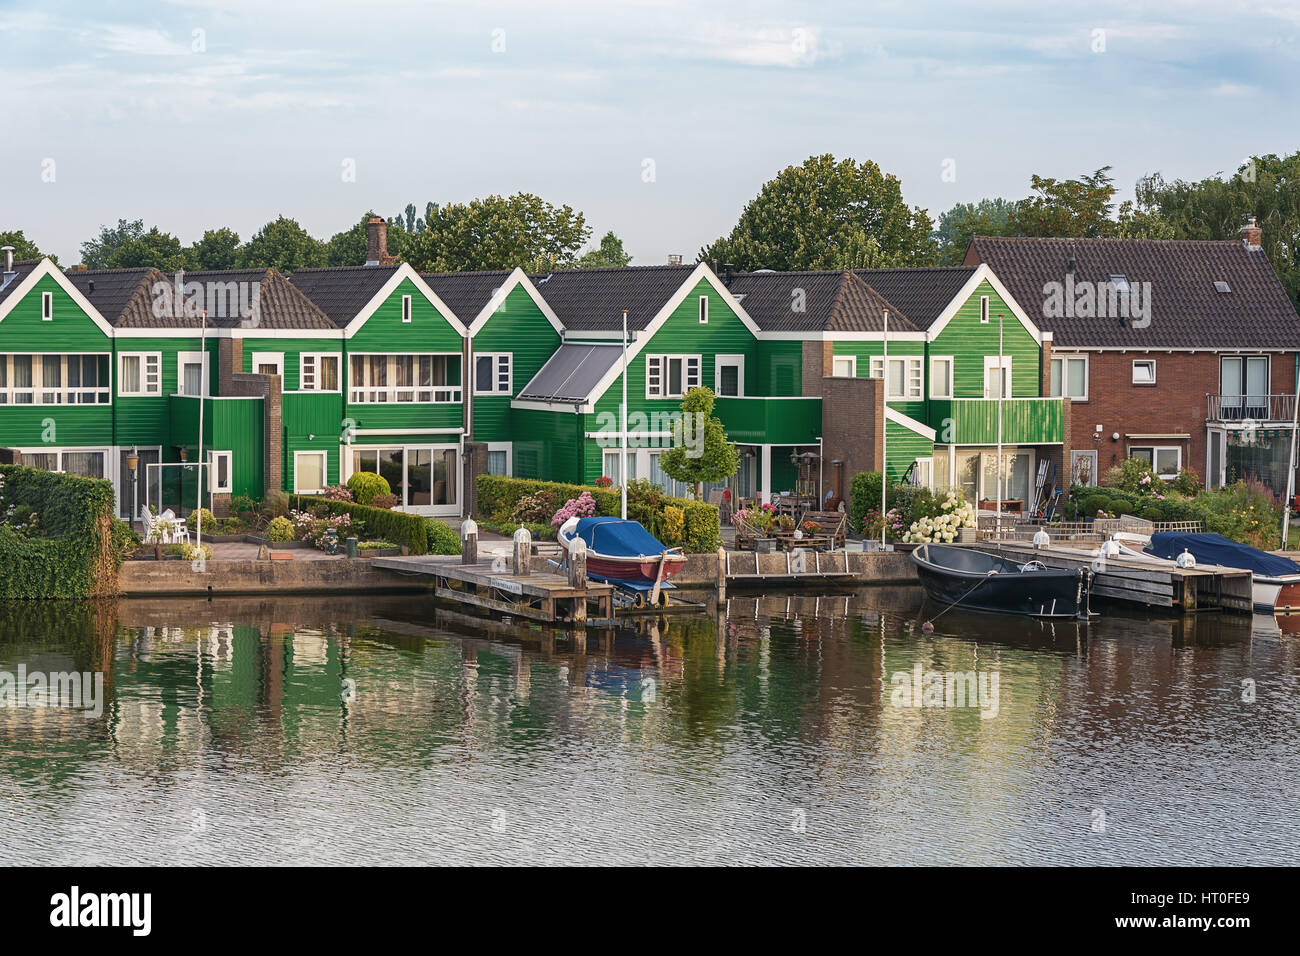 The Zaanse Schans with its typical green wooden houses, bridges and ditches. Stock Photo